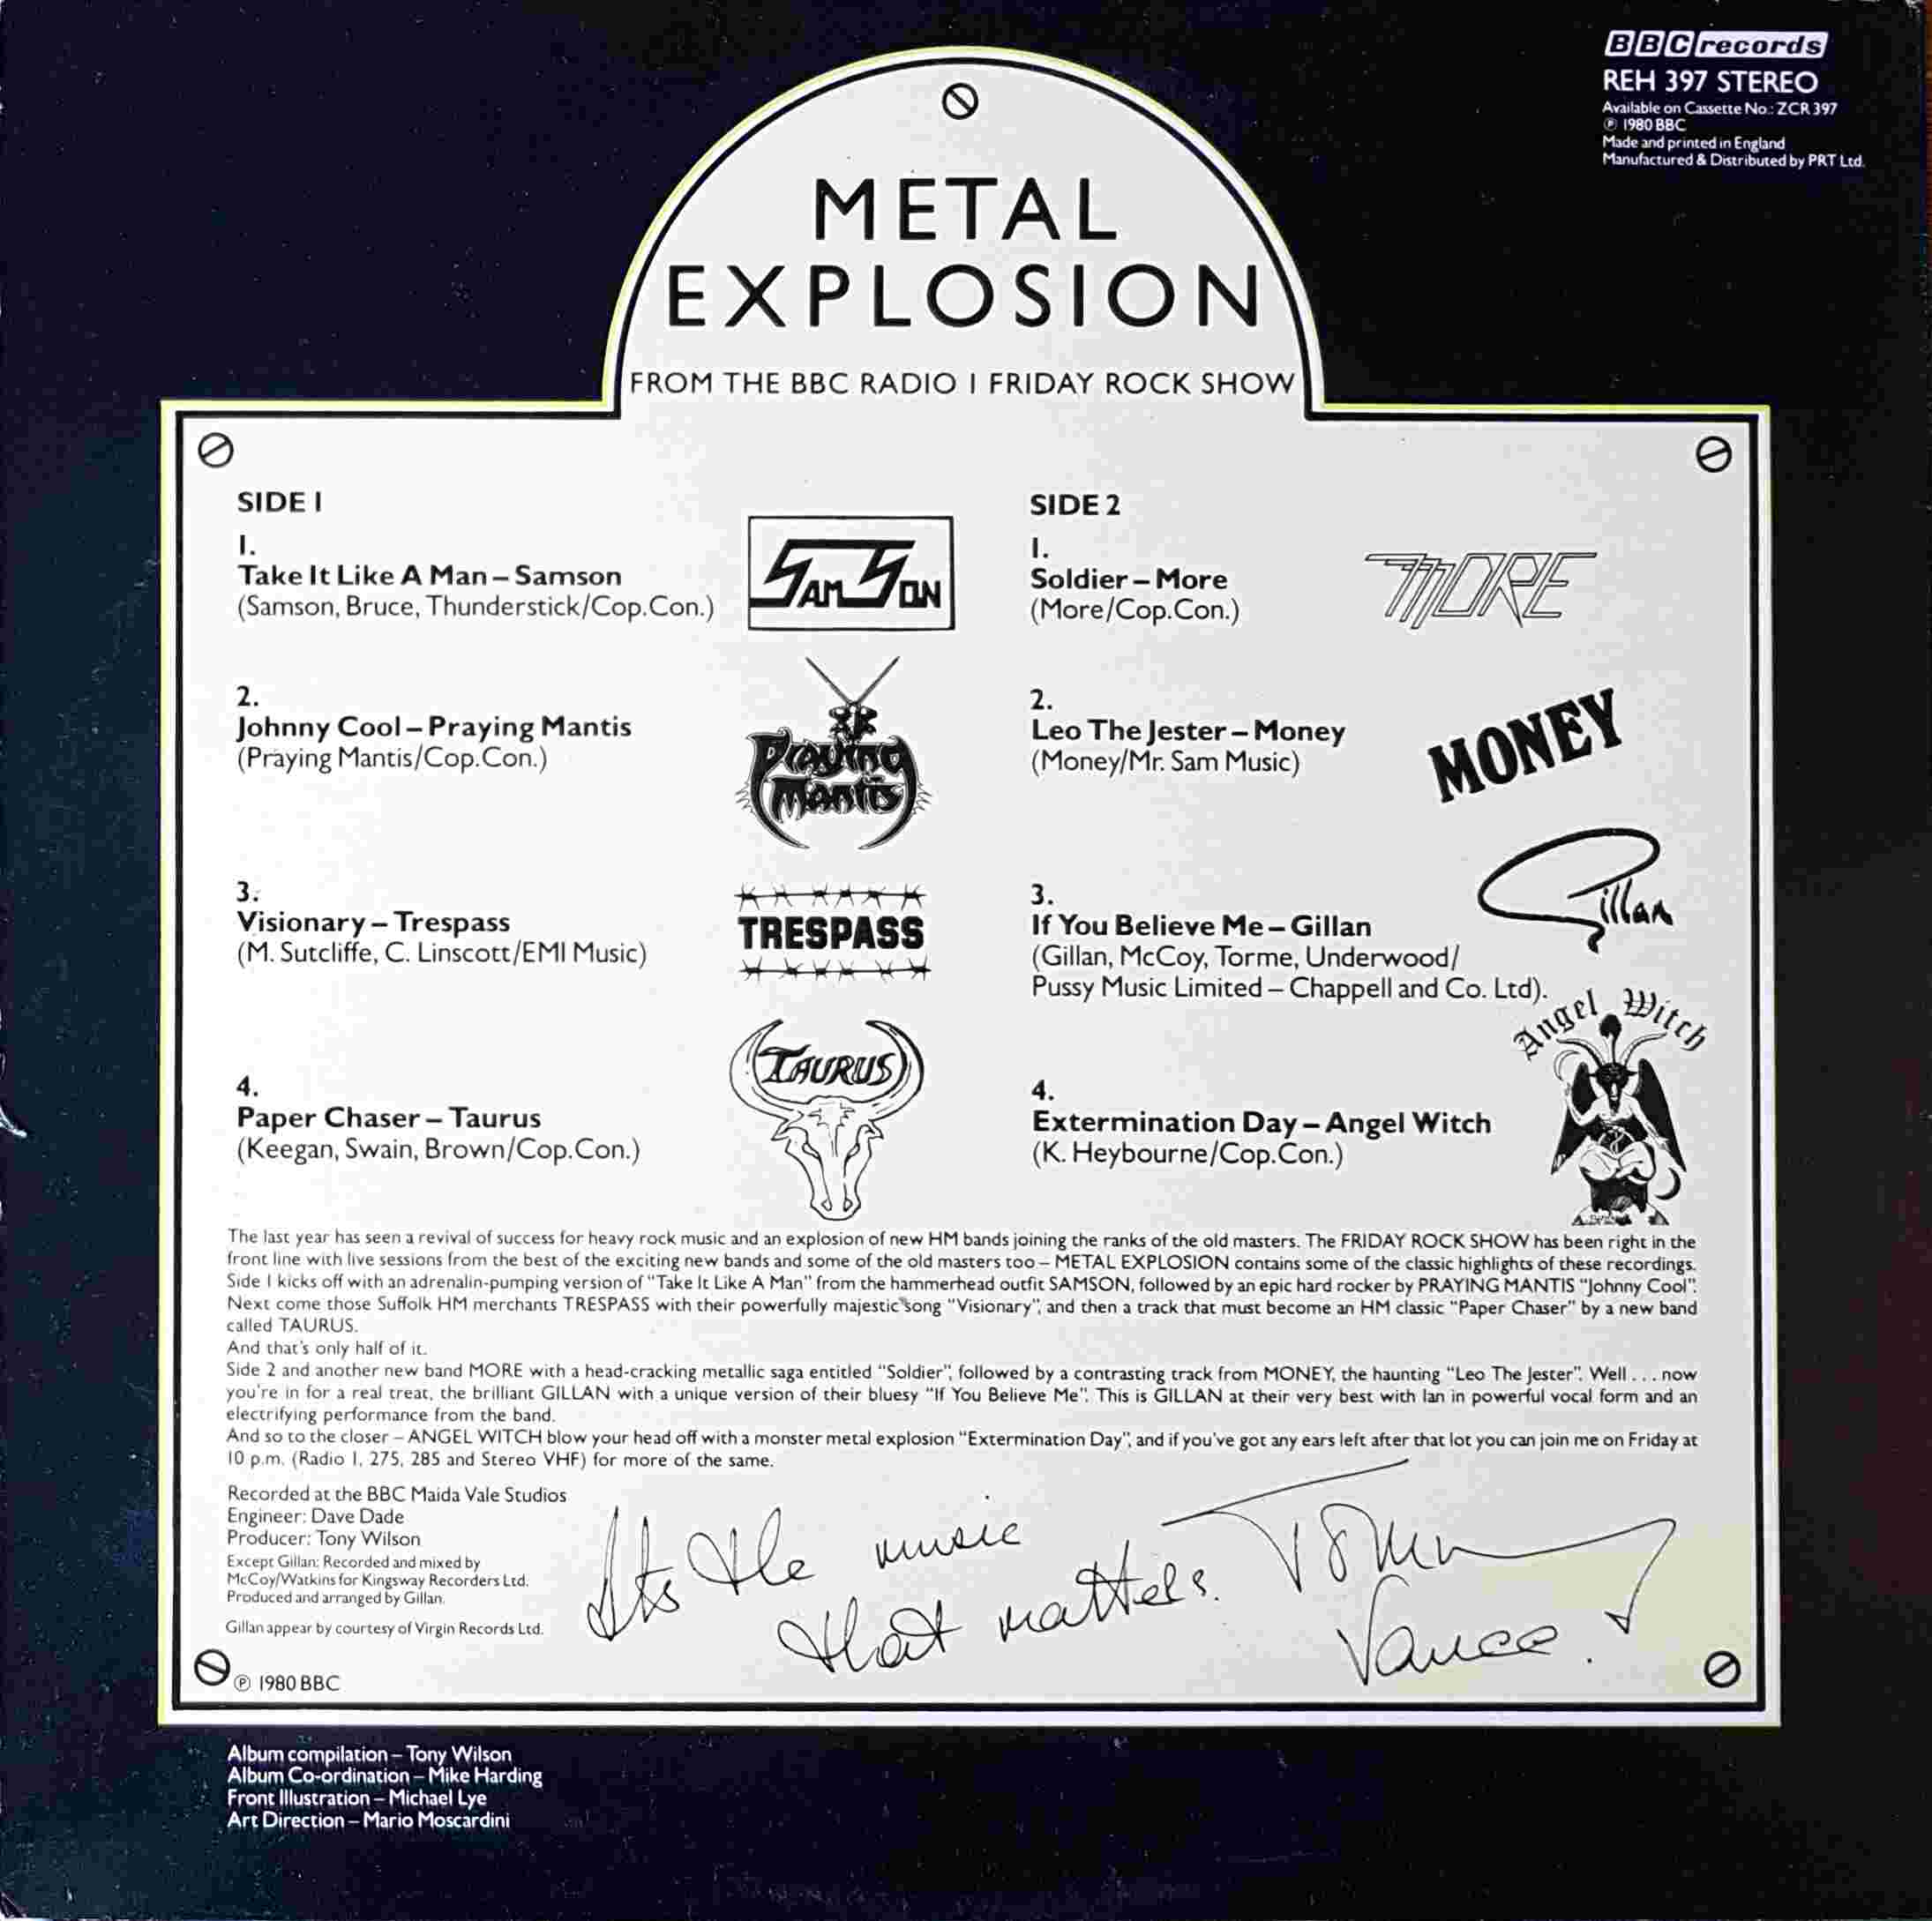 Picture of REH 397 Metal explosion from the Friday Rock Show by artist Various from the BBC records and Tapes library